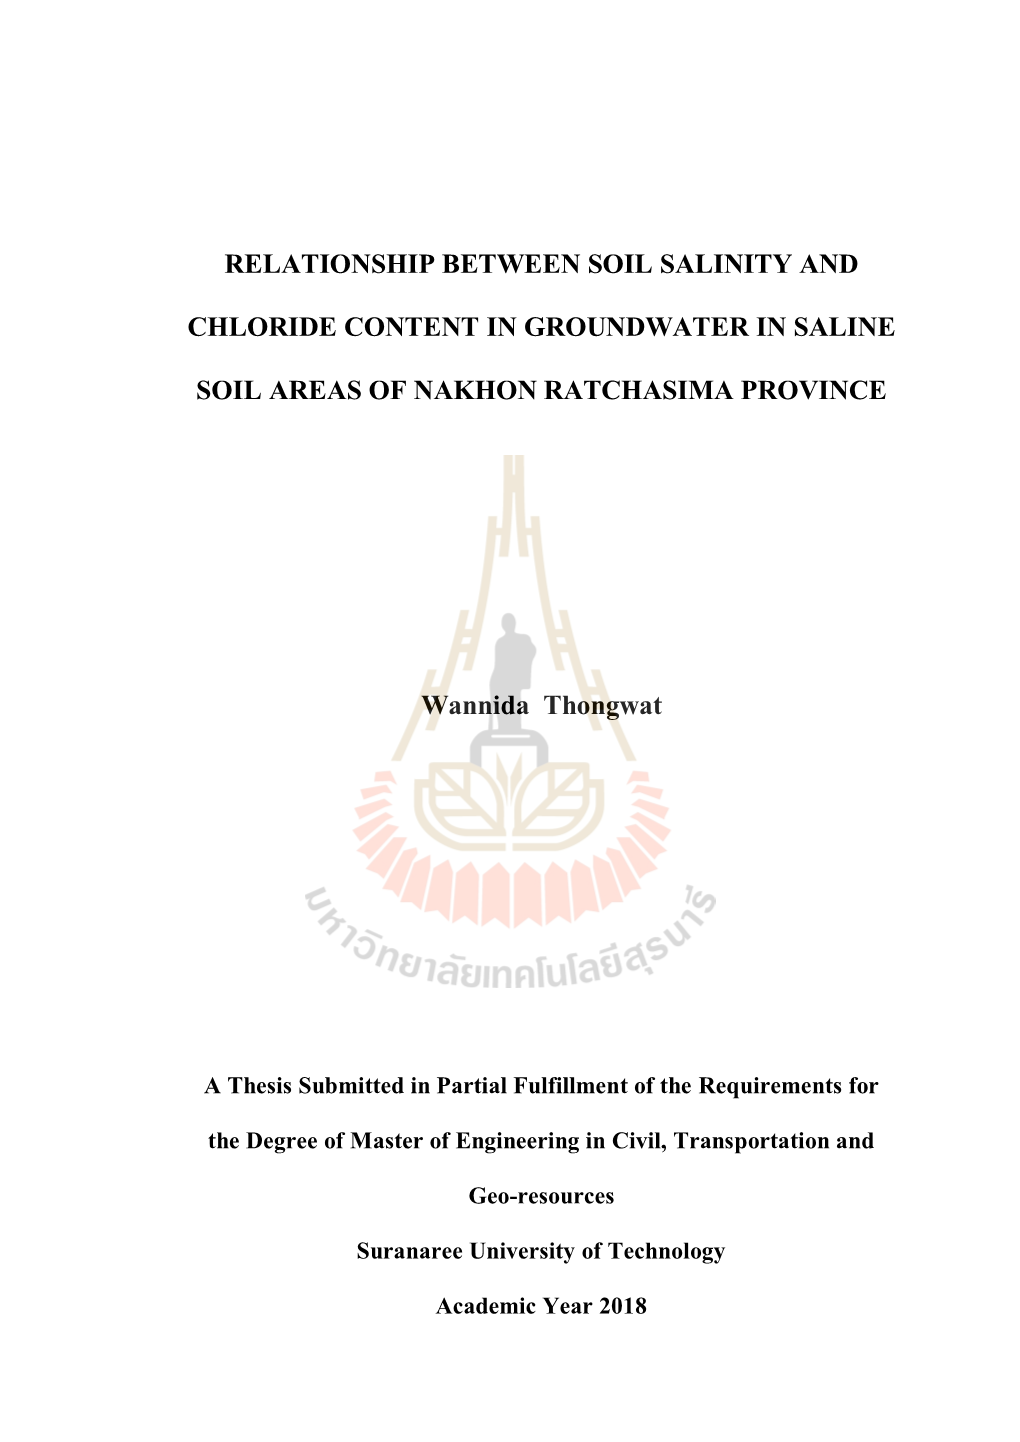 Relationship Between Soil Salinity and Chloride Content in Groundwater Within Saline Soil Areas